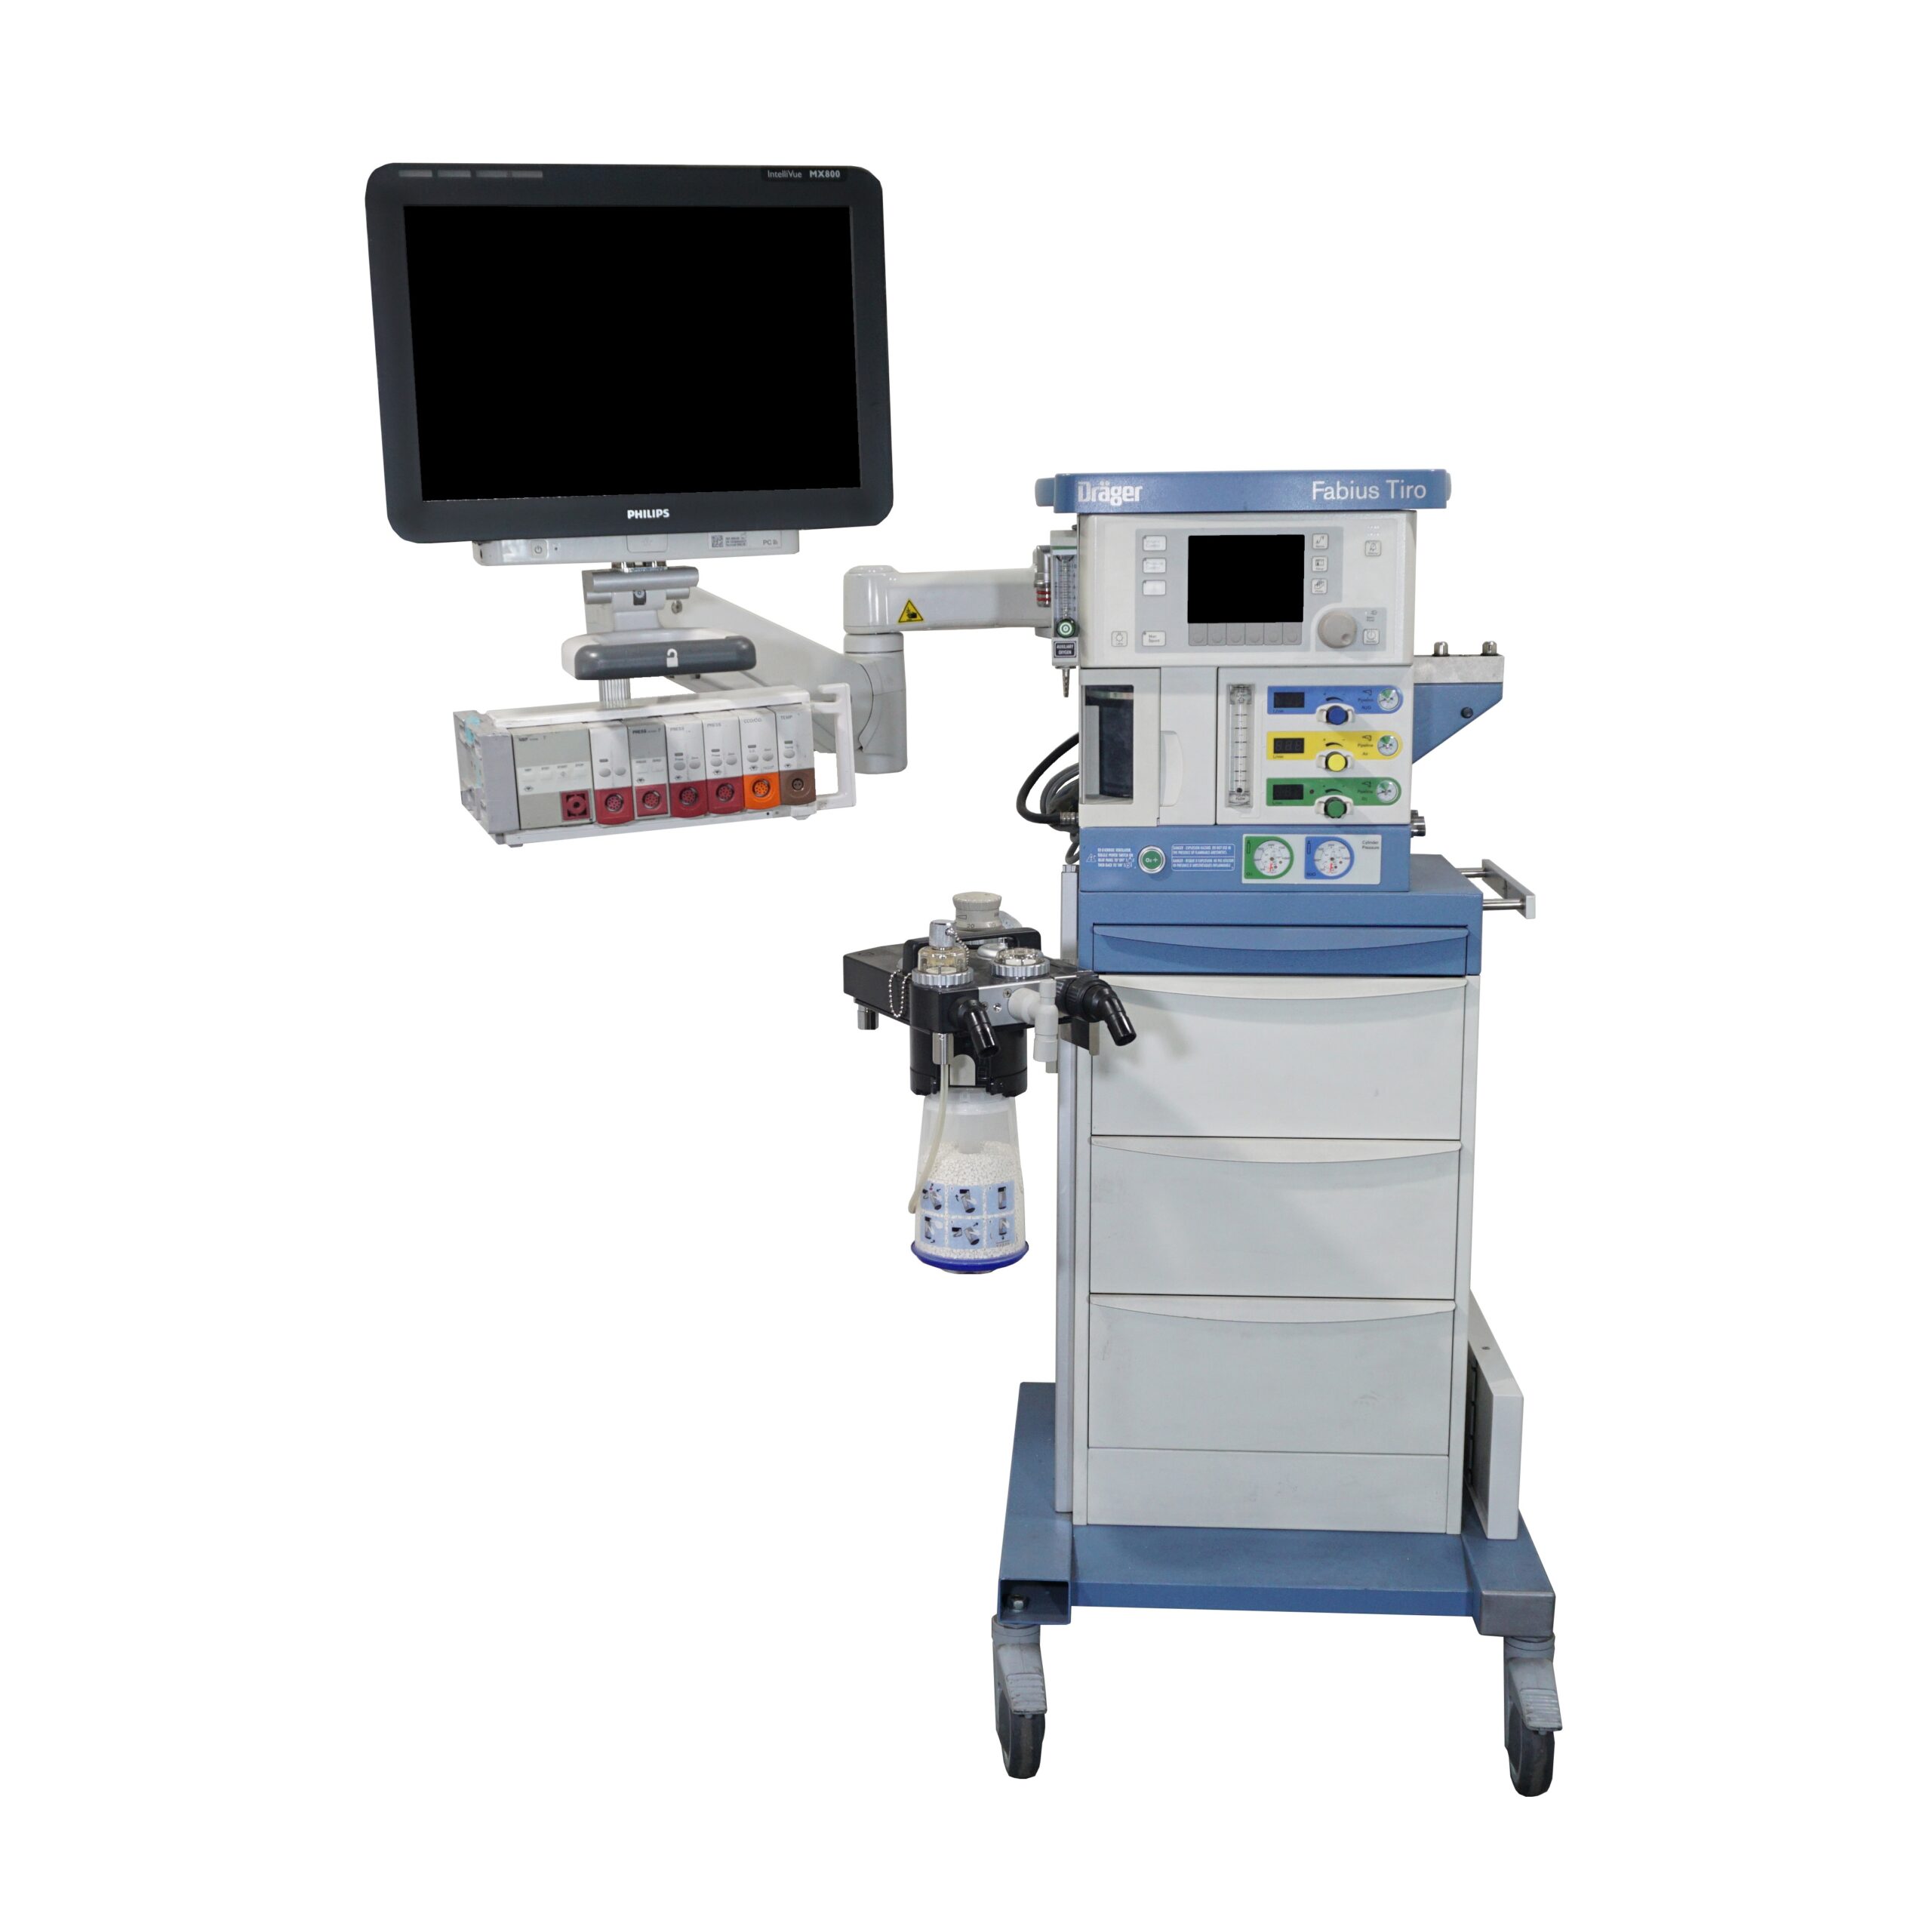 Philips IntelliVue MX600-850 with FMS or Single FMX-4 on Dräger Tiro